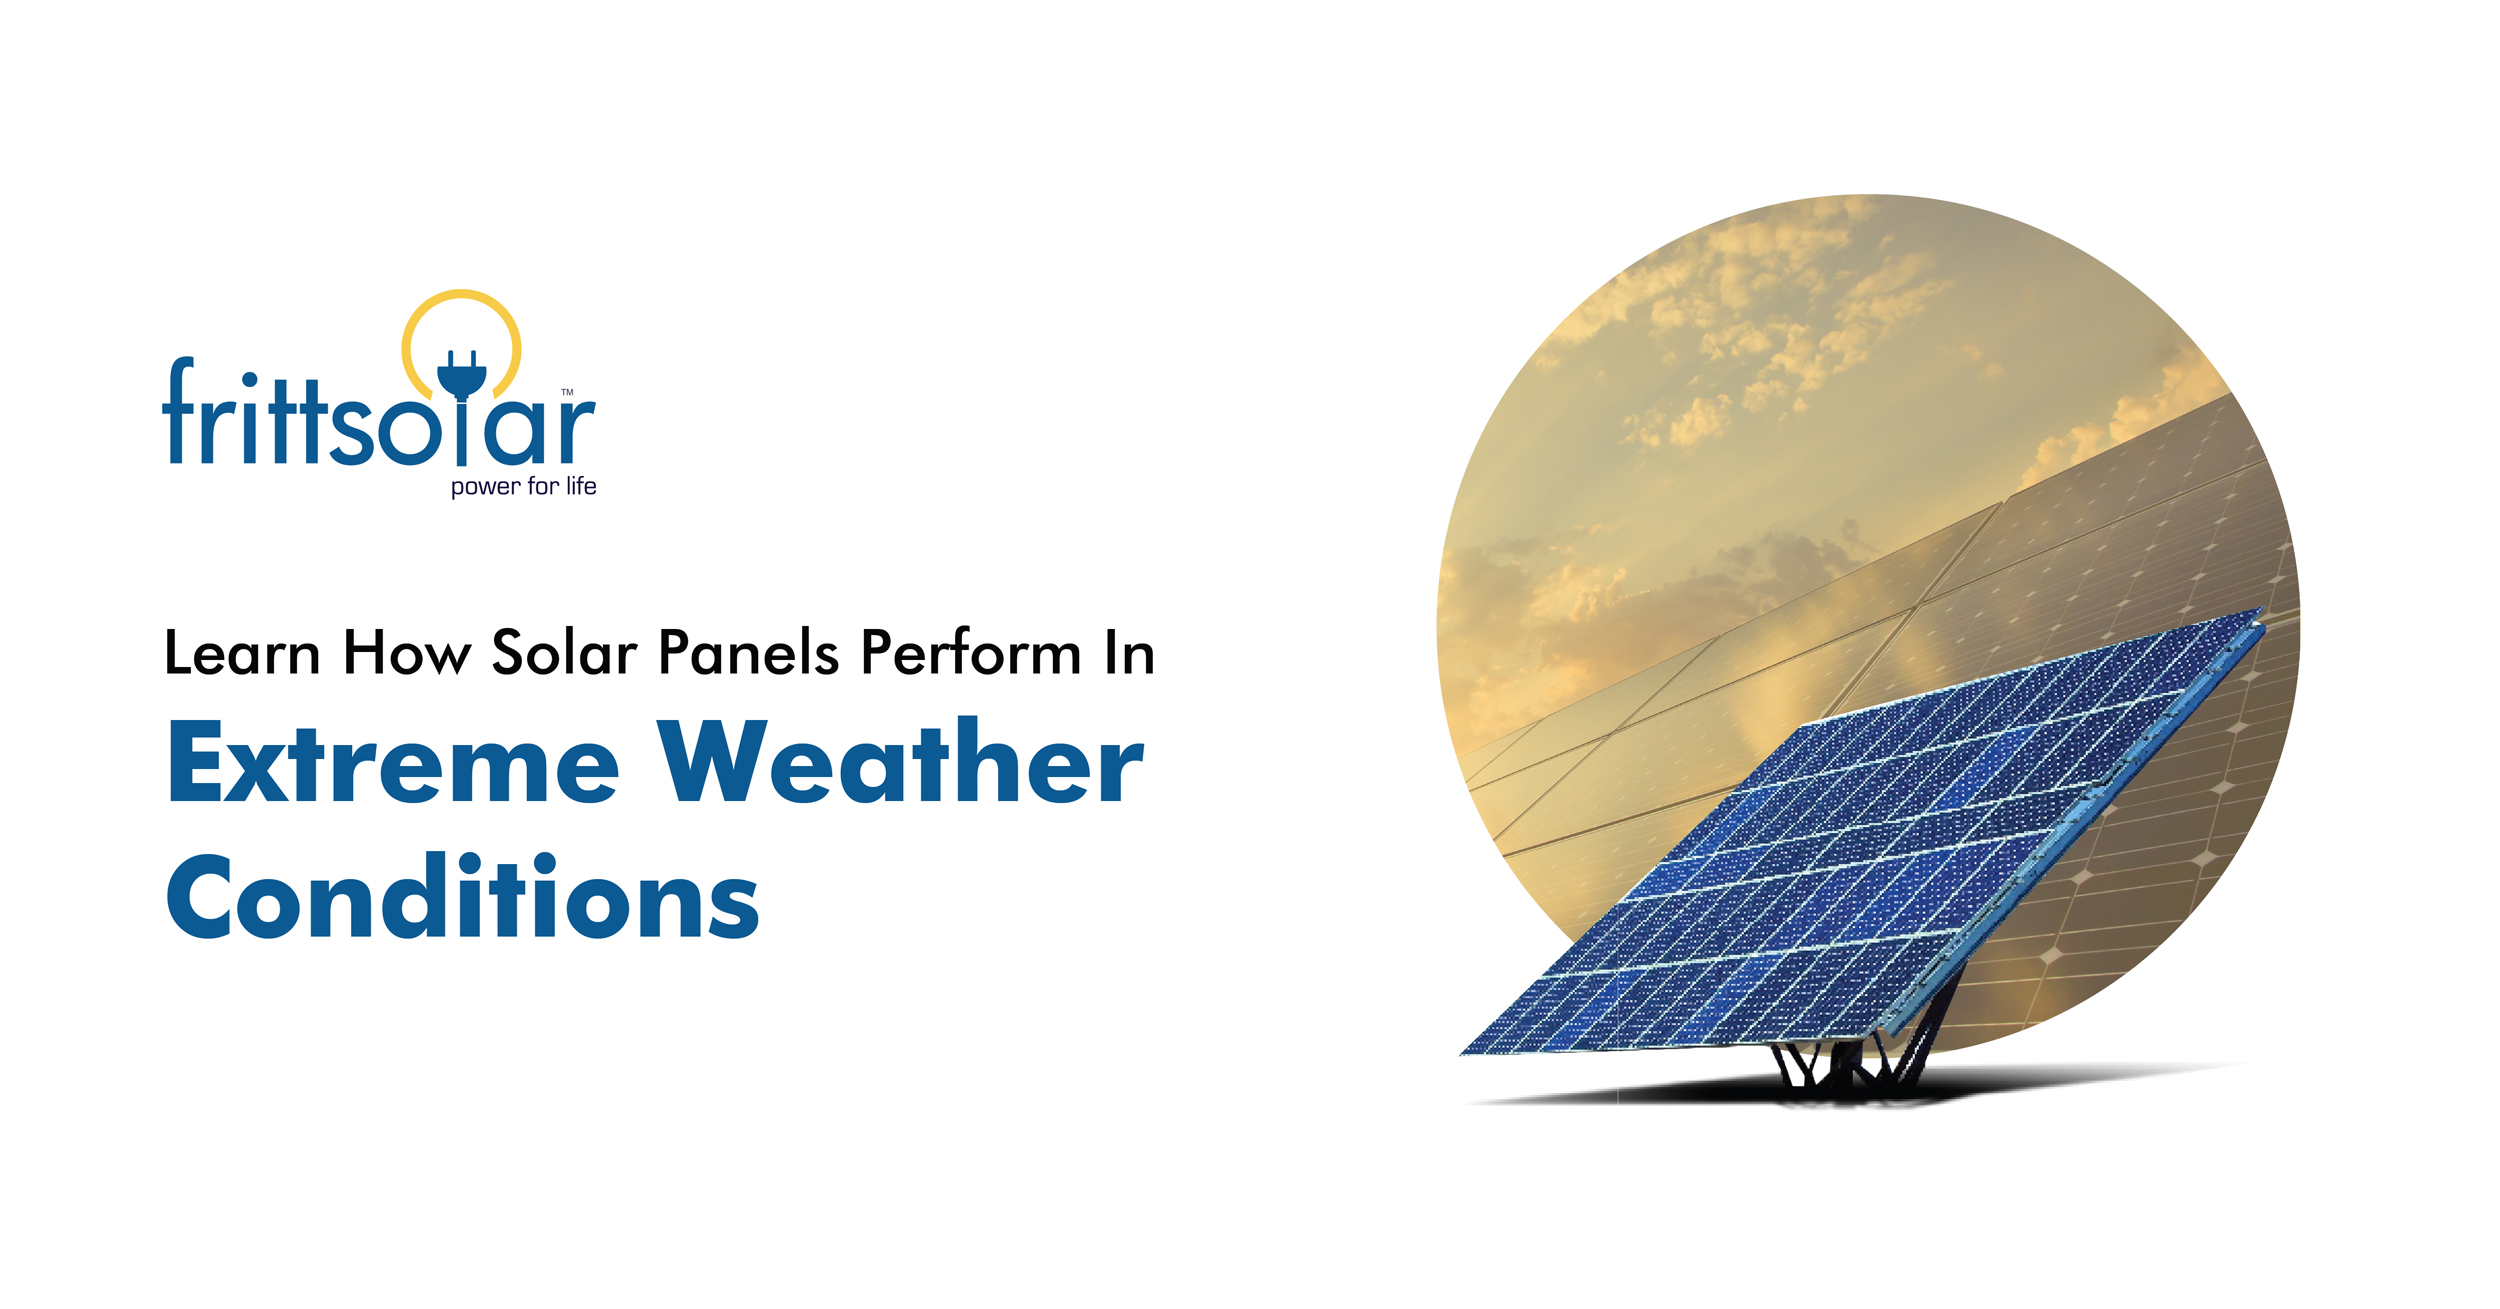 Learn How Solar Panels Perform In Extreme Weather Conditions